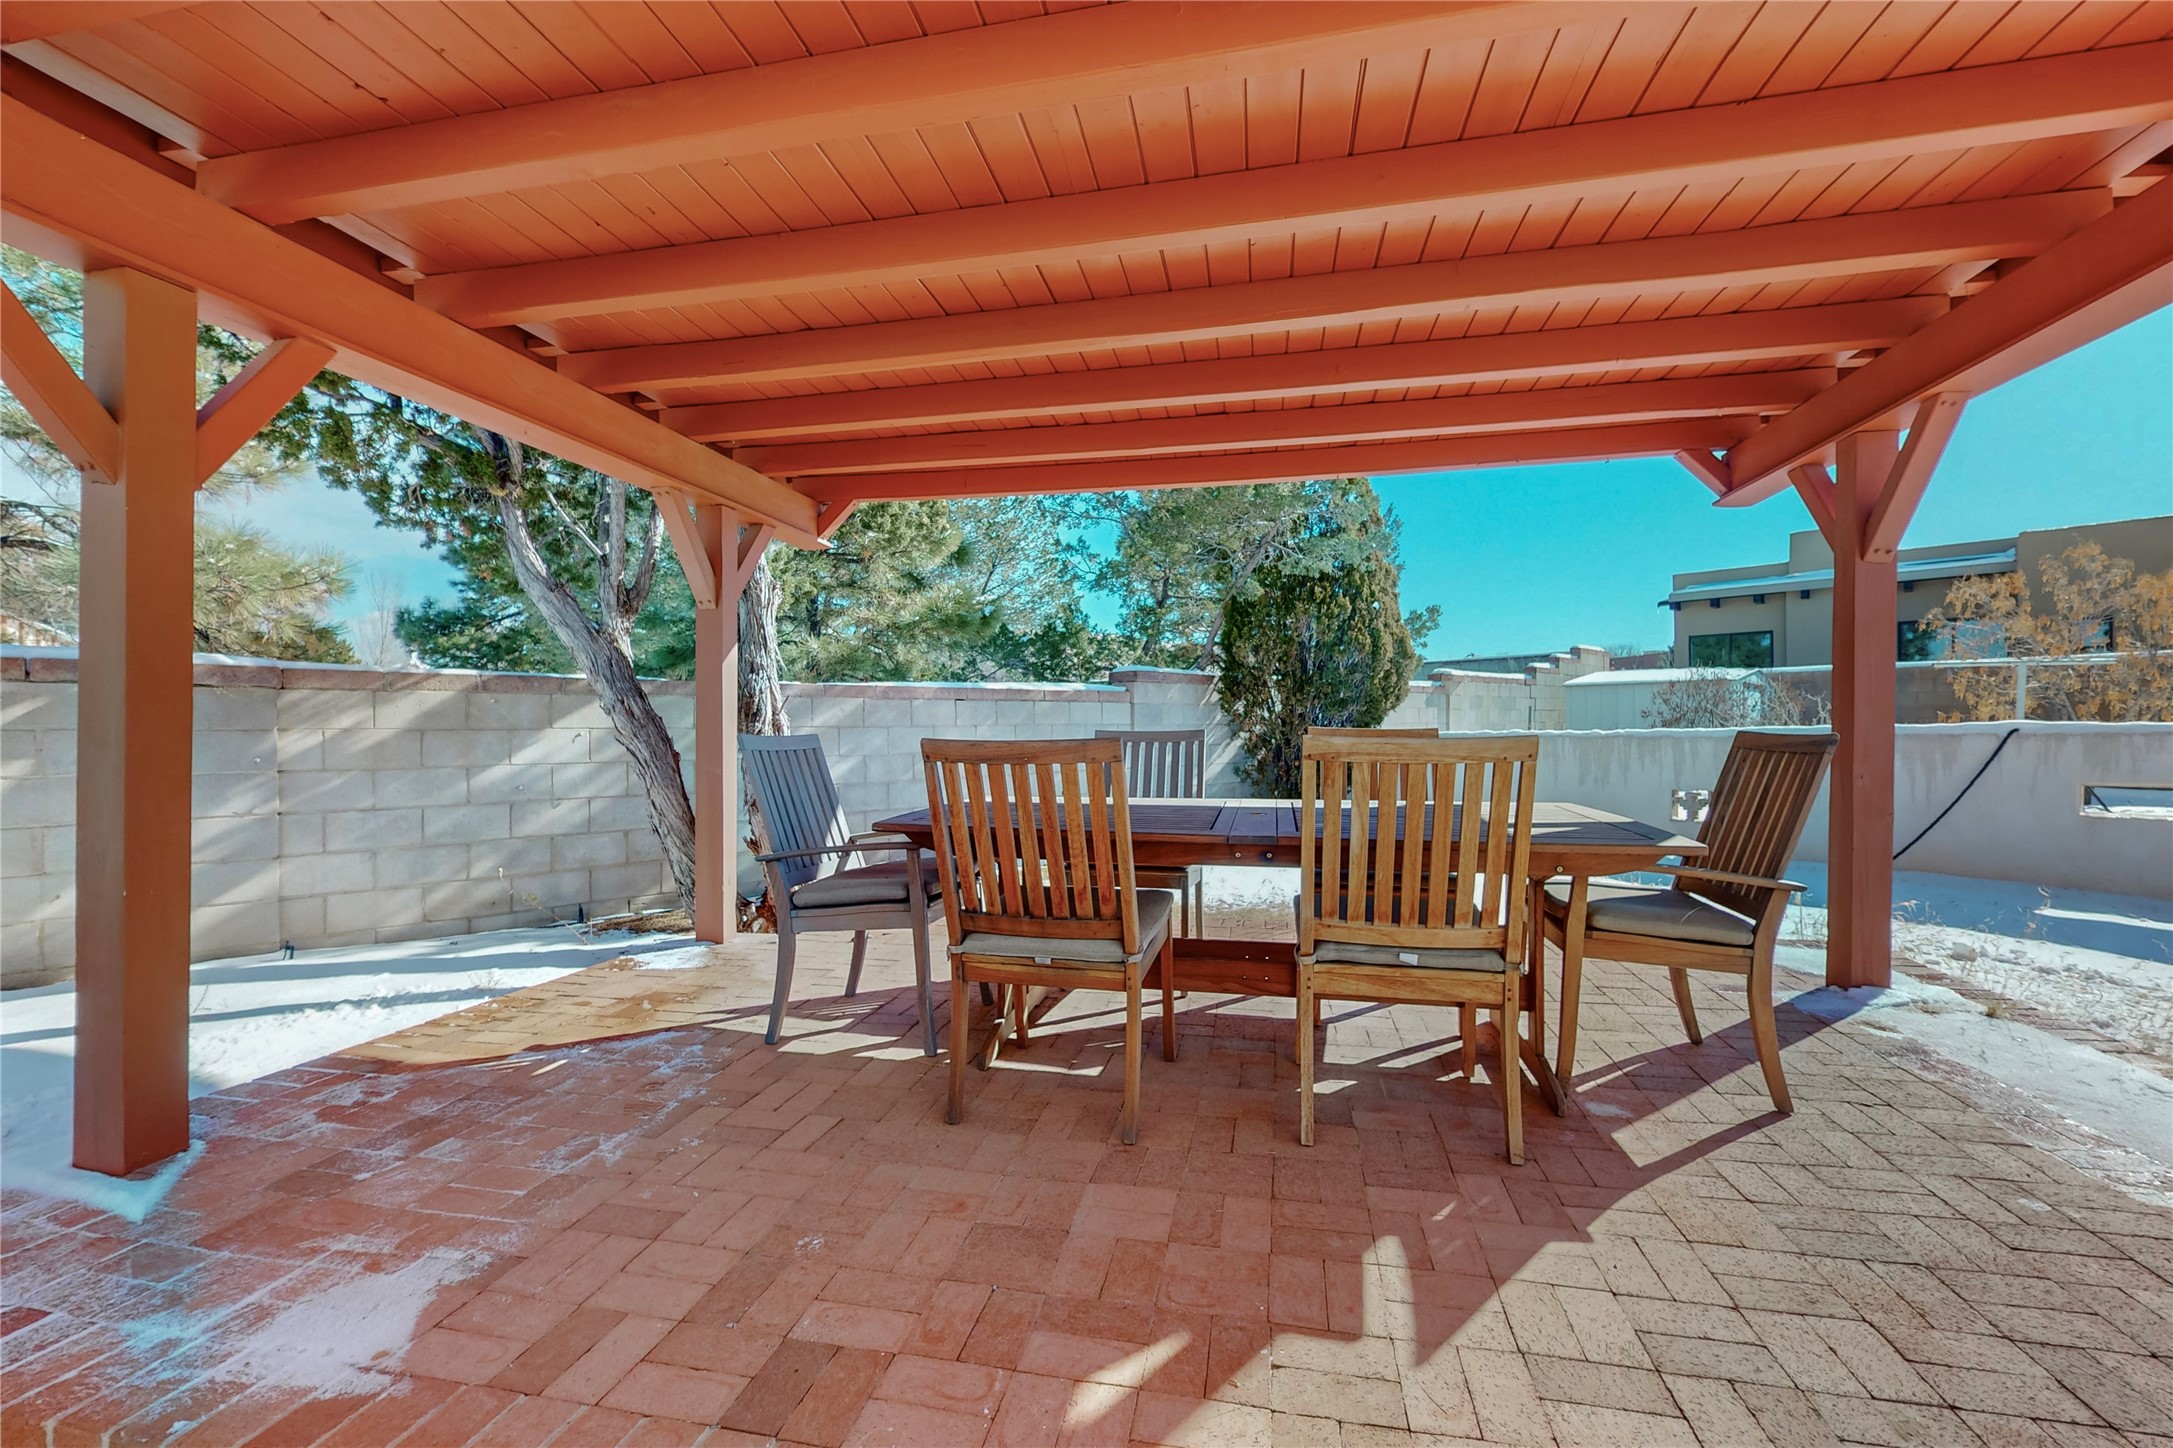 416 W San Mateo Road, Santa Fe, New Mexico 87505, 3 Bedrooms Bedrooms, ,2 BathroomsBathrooms,Residential,For Sale,416 W San Mateo Road,202400072